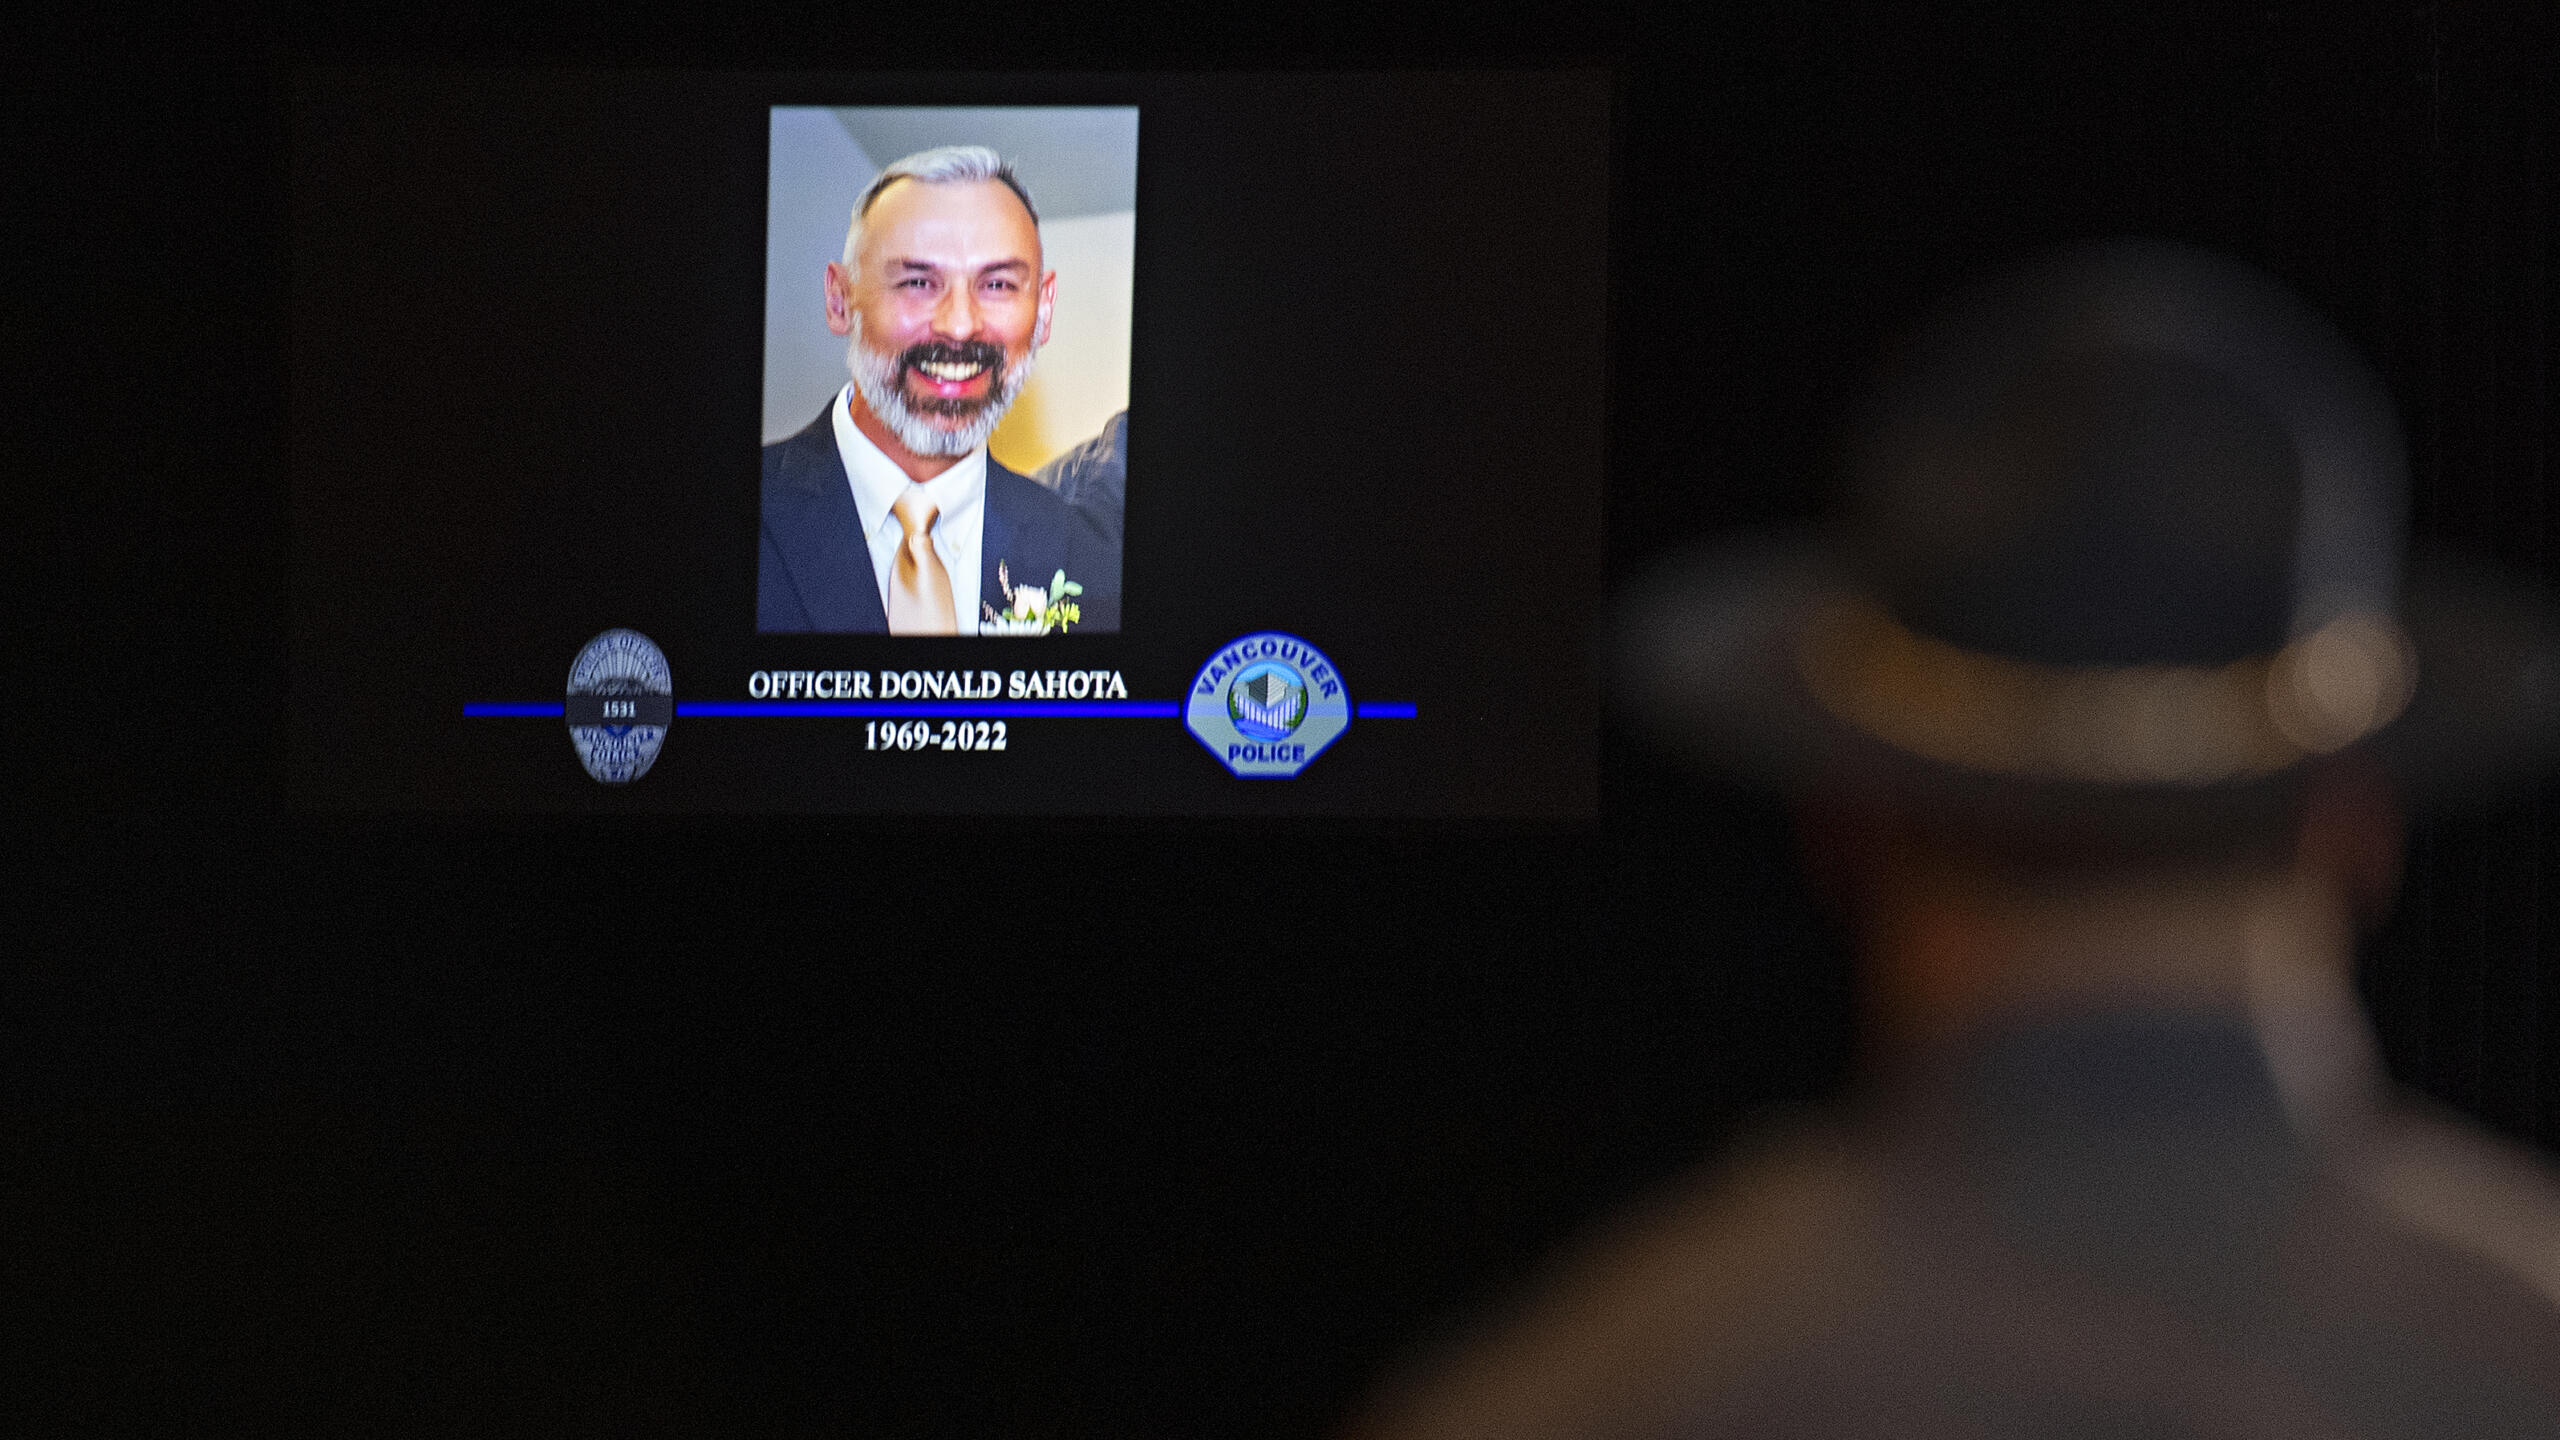 Law enforcement officials pay tribute to Officer Donal Sahota during a memorial service at ilani Casino Resort near La Center on Tuesday afternoon, Feb. 8, 2022.